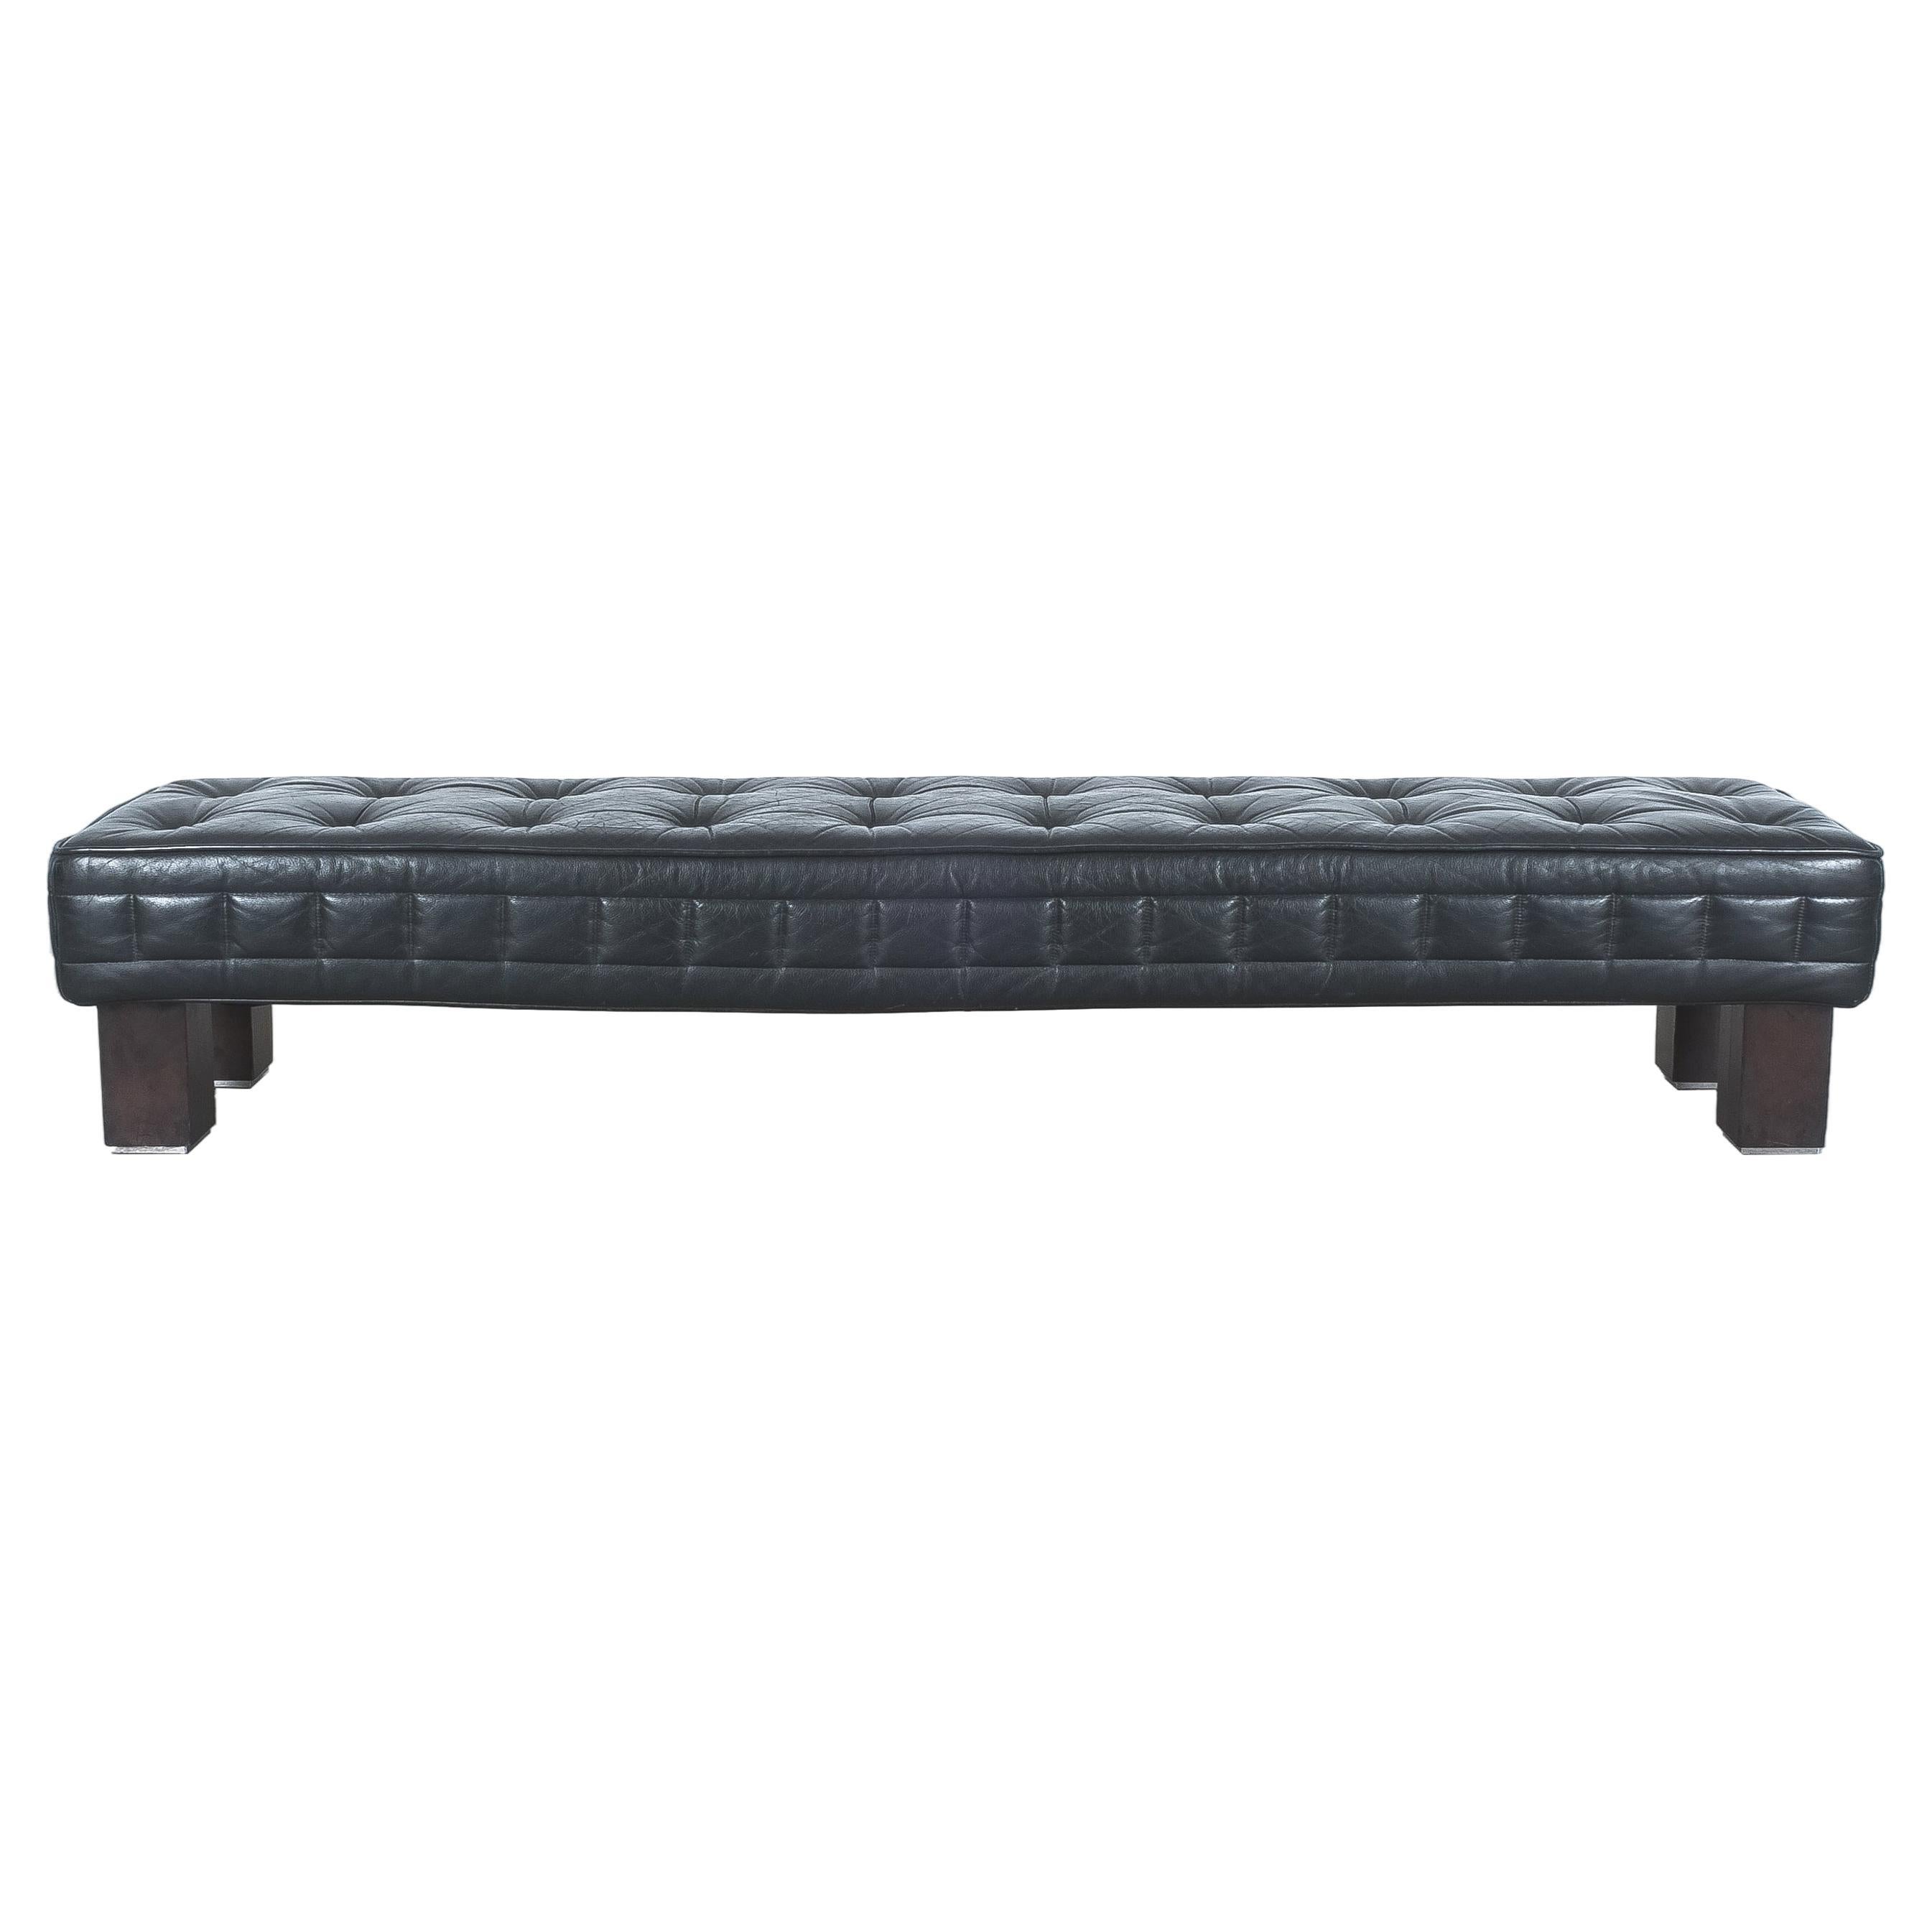 Matteo Thun Tufted Black Leather Banquettes (2 pieces) Bench Materassi, Wittmann For Sale